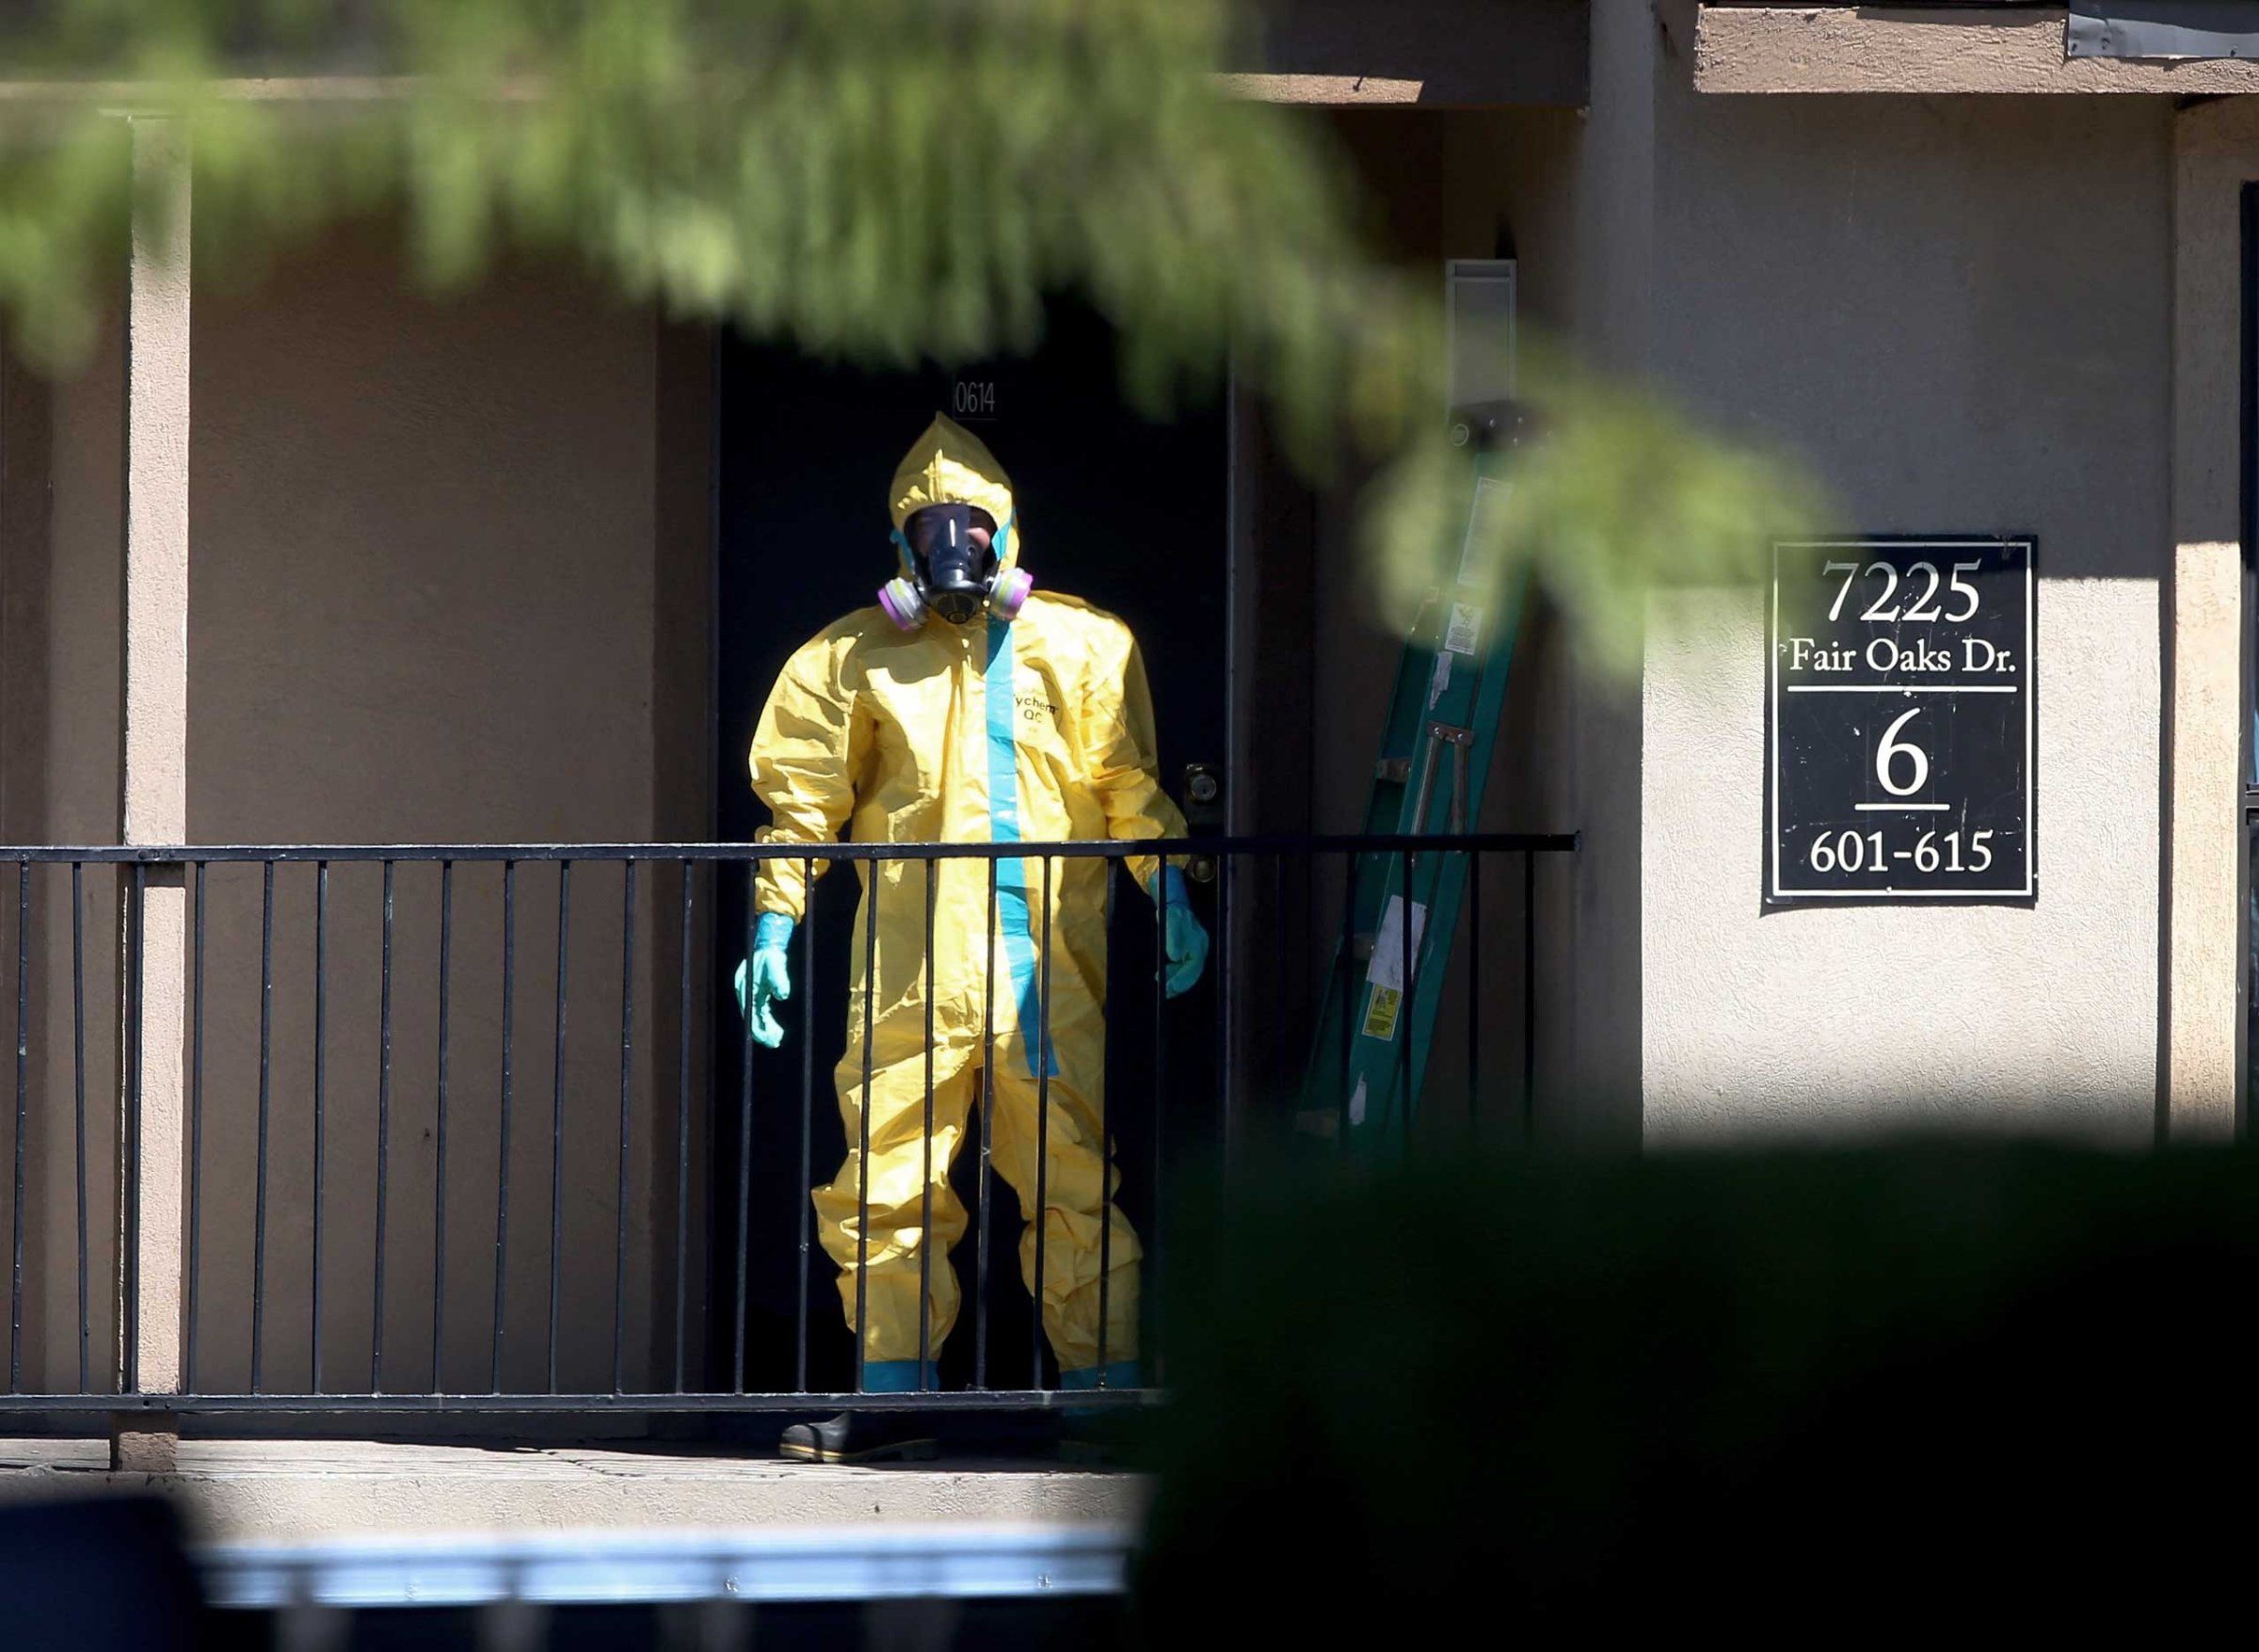 A hazmat team member arrives to clean a unit at the Ivy Apartments, where the confirmed Ebola virus patient was staying, on Oct. 3, 2014 in Dallas, Texas.